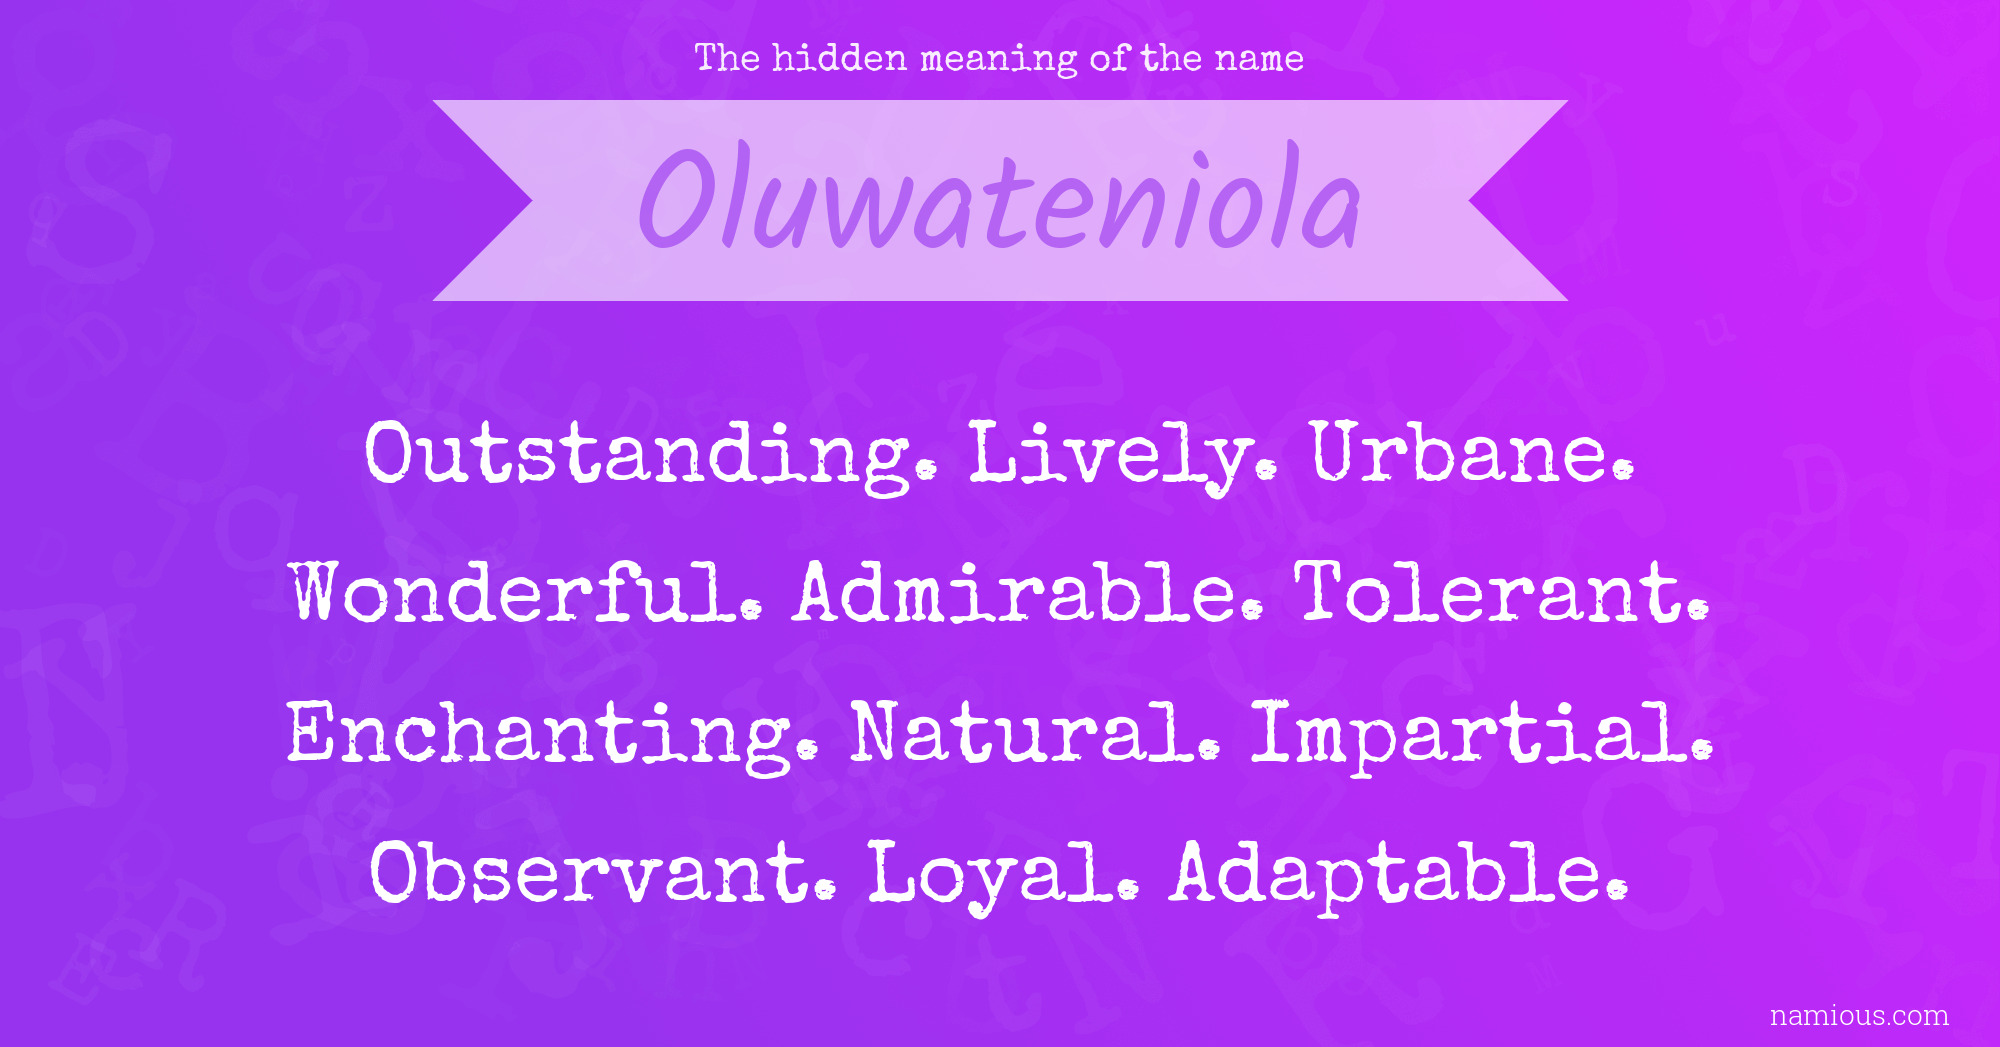 The hidden meaning of the name Oluwateniola